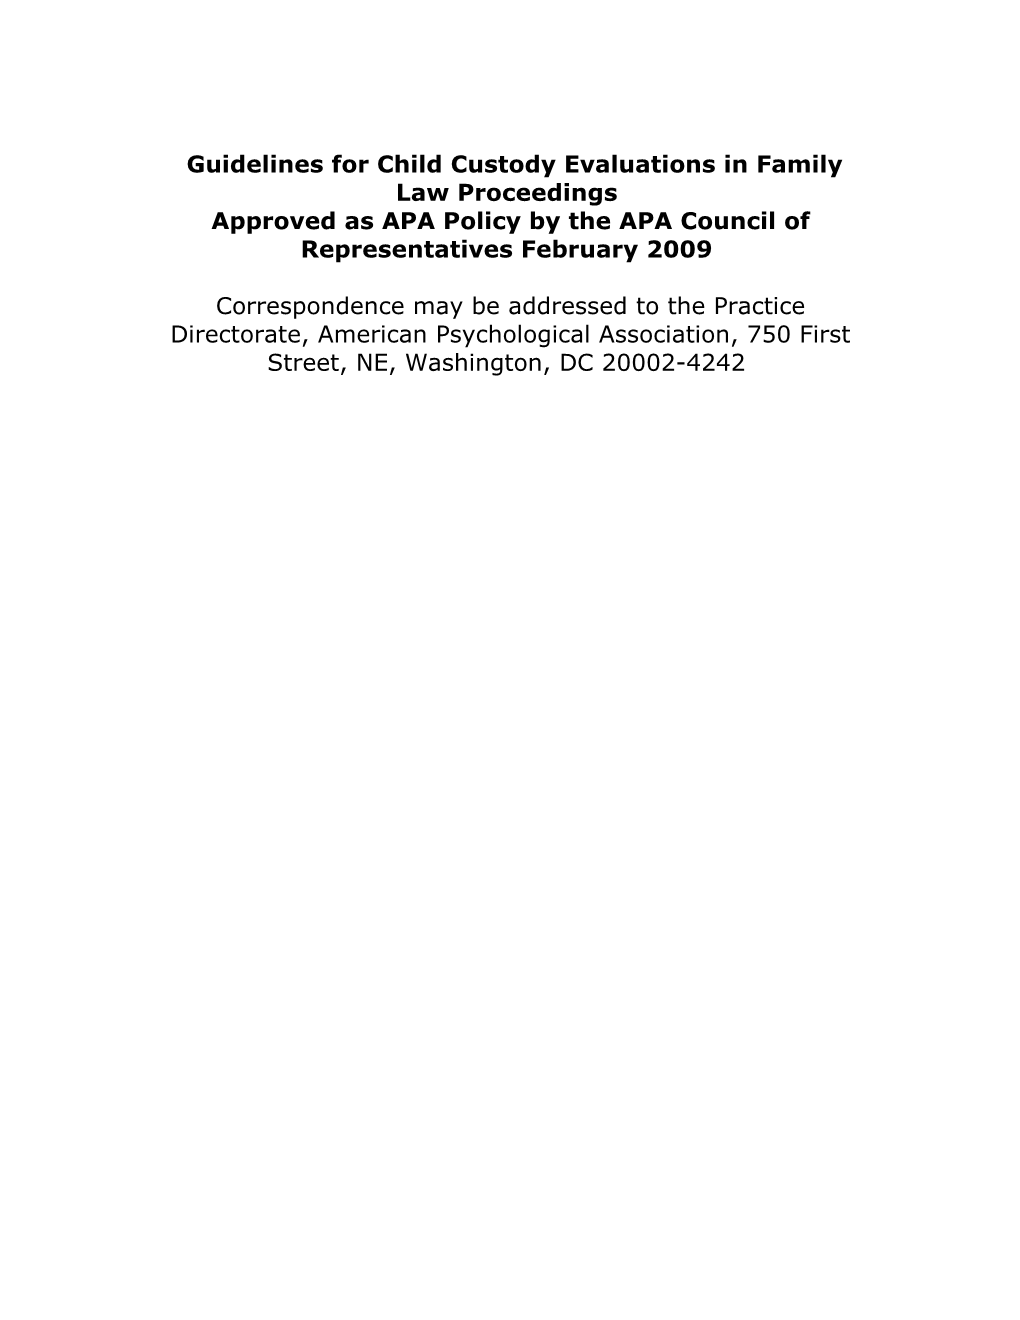 Guidelines for Child Custody Evaluations in Family Law Proceedings